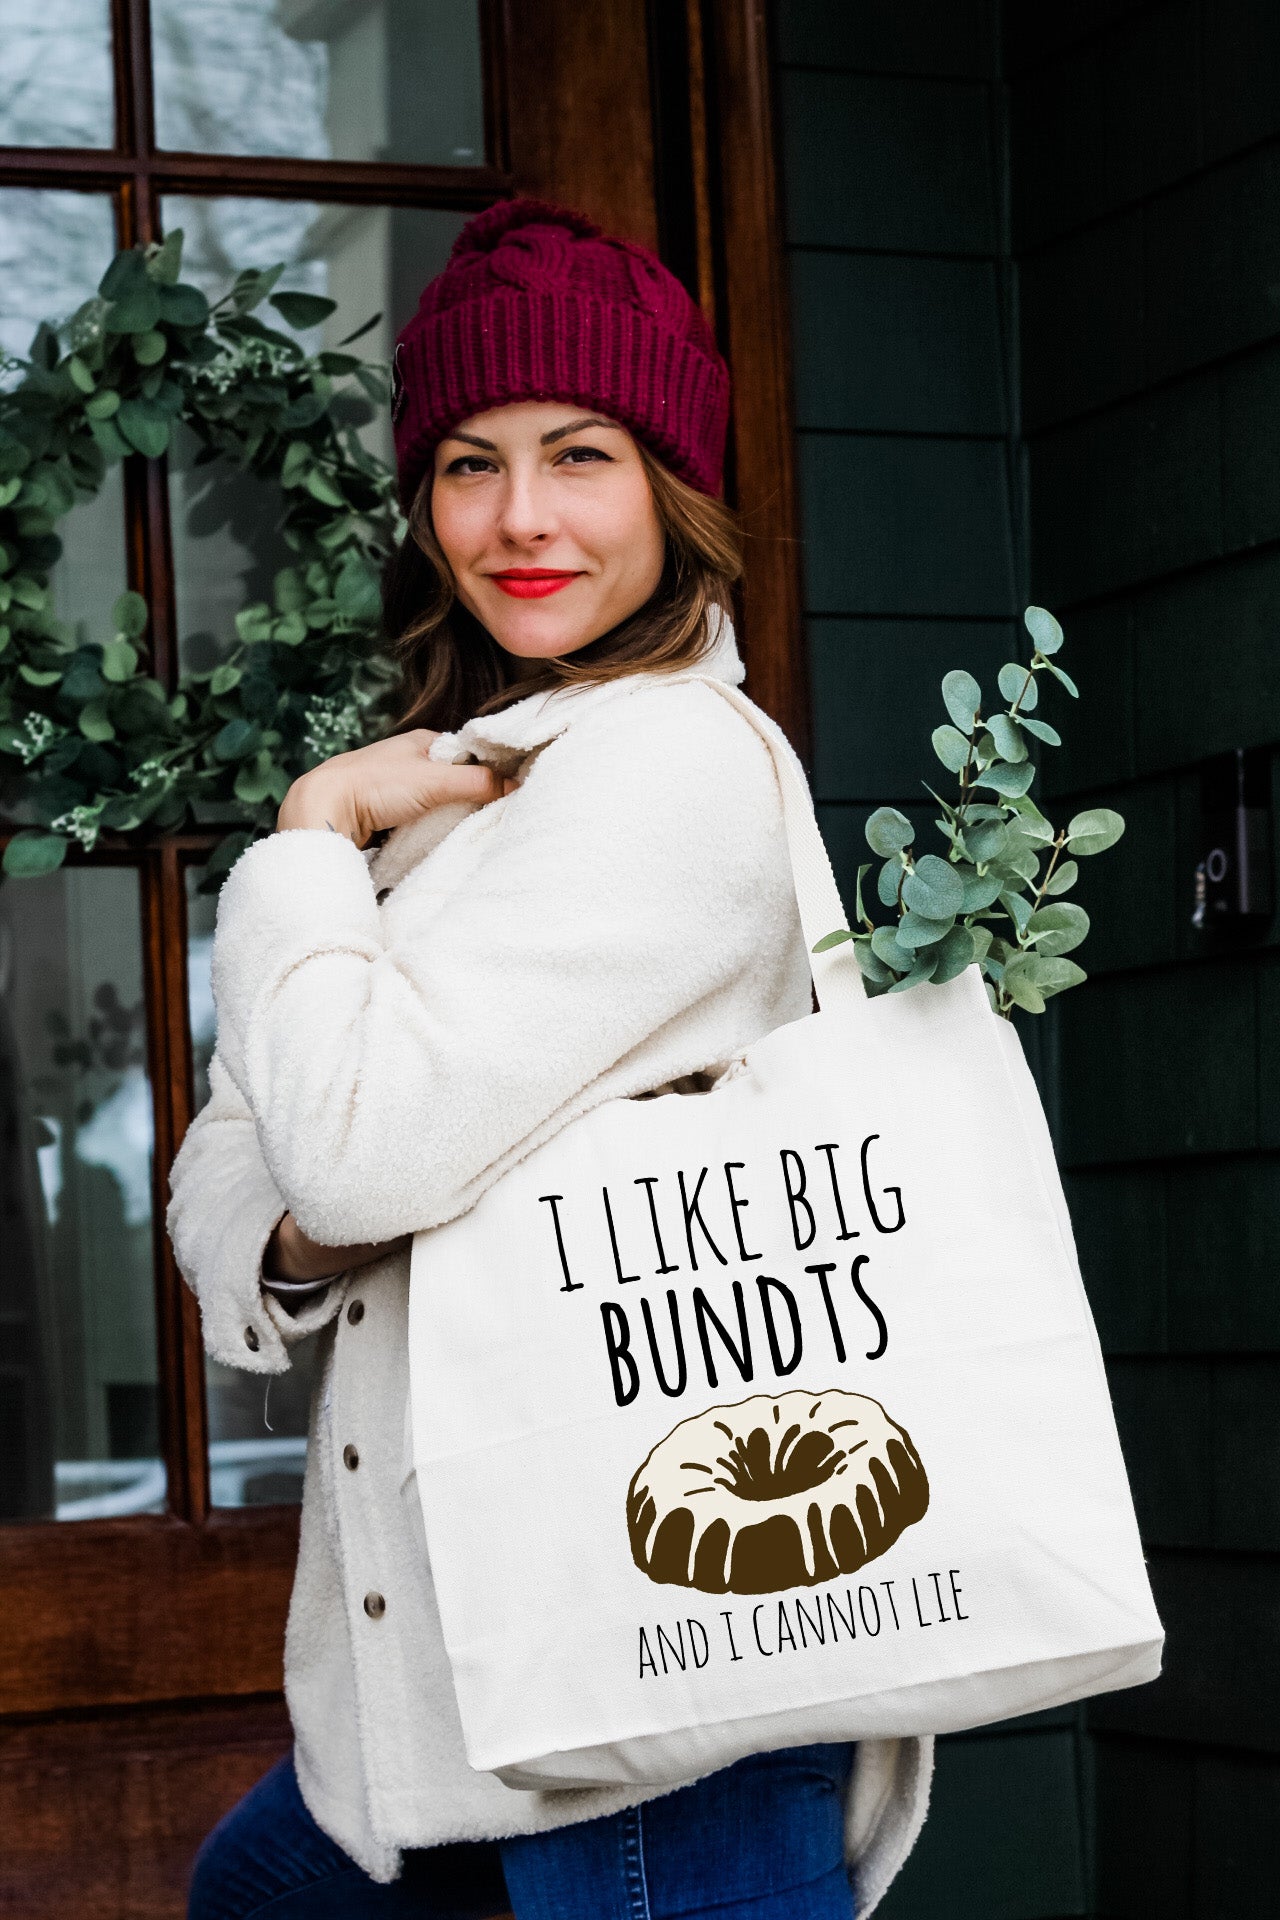 a woman carrying a bag that says i like big bundts and cannot lie